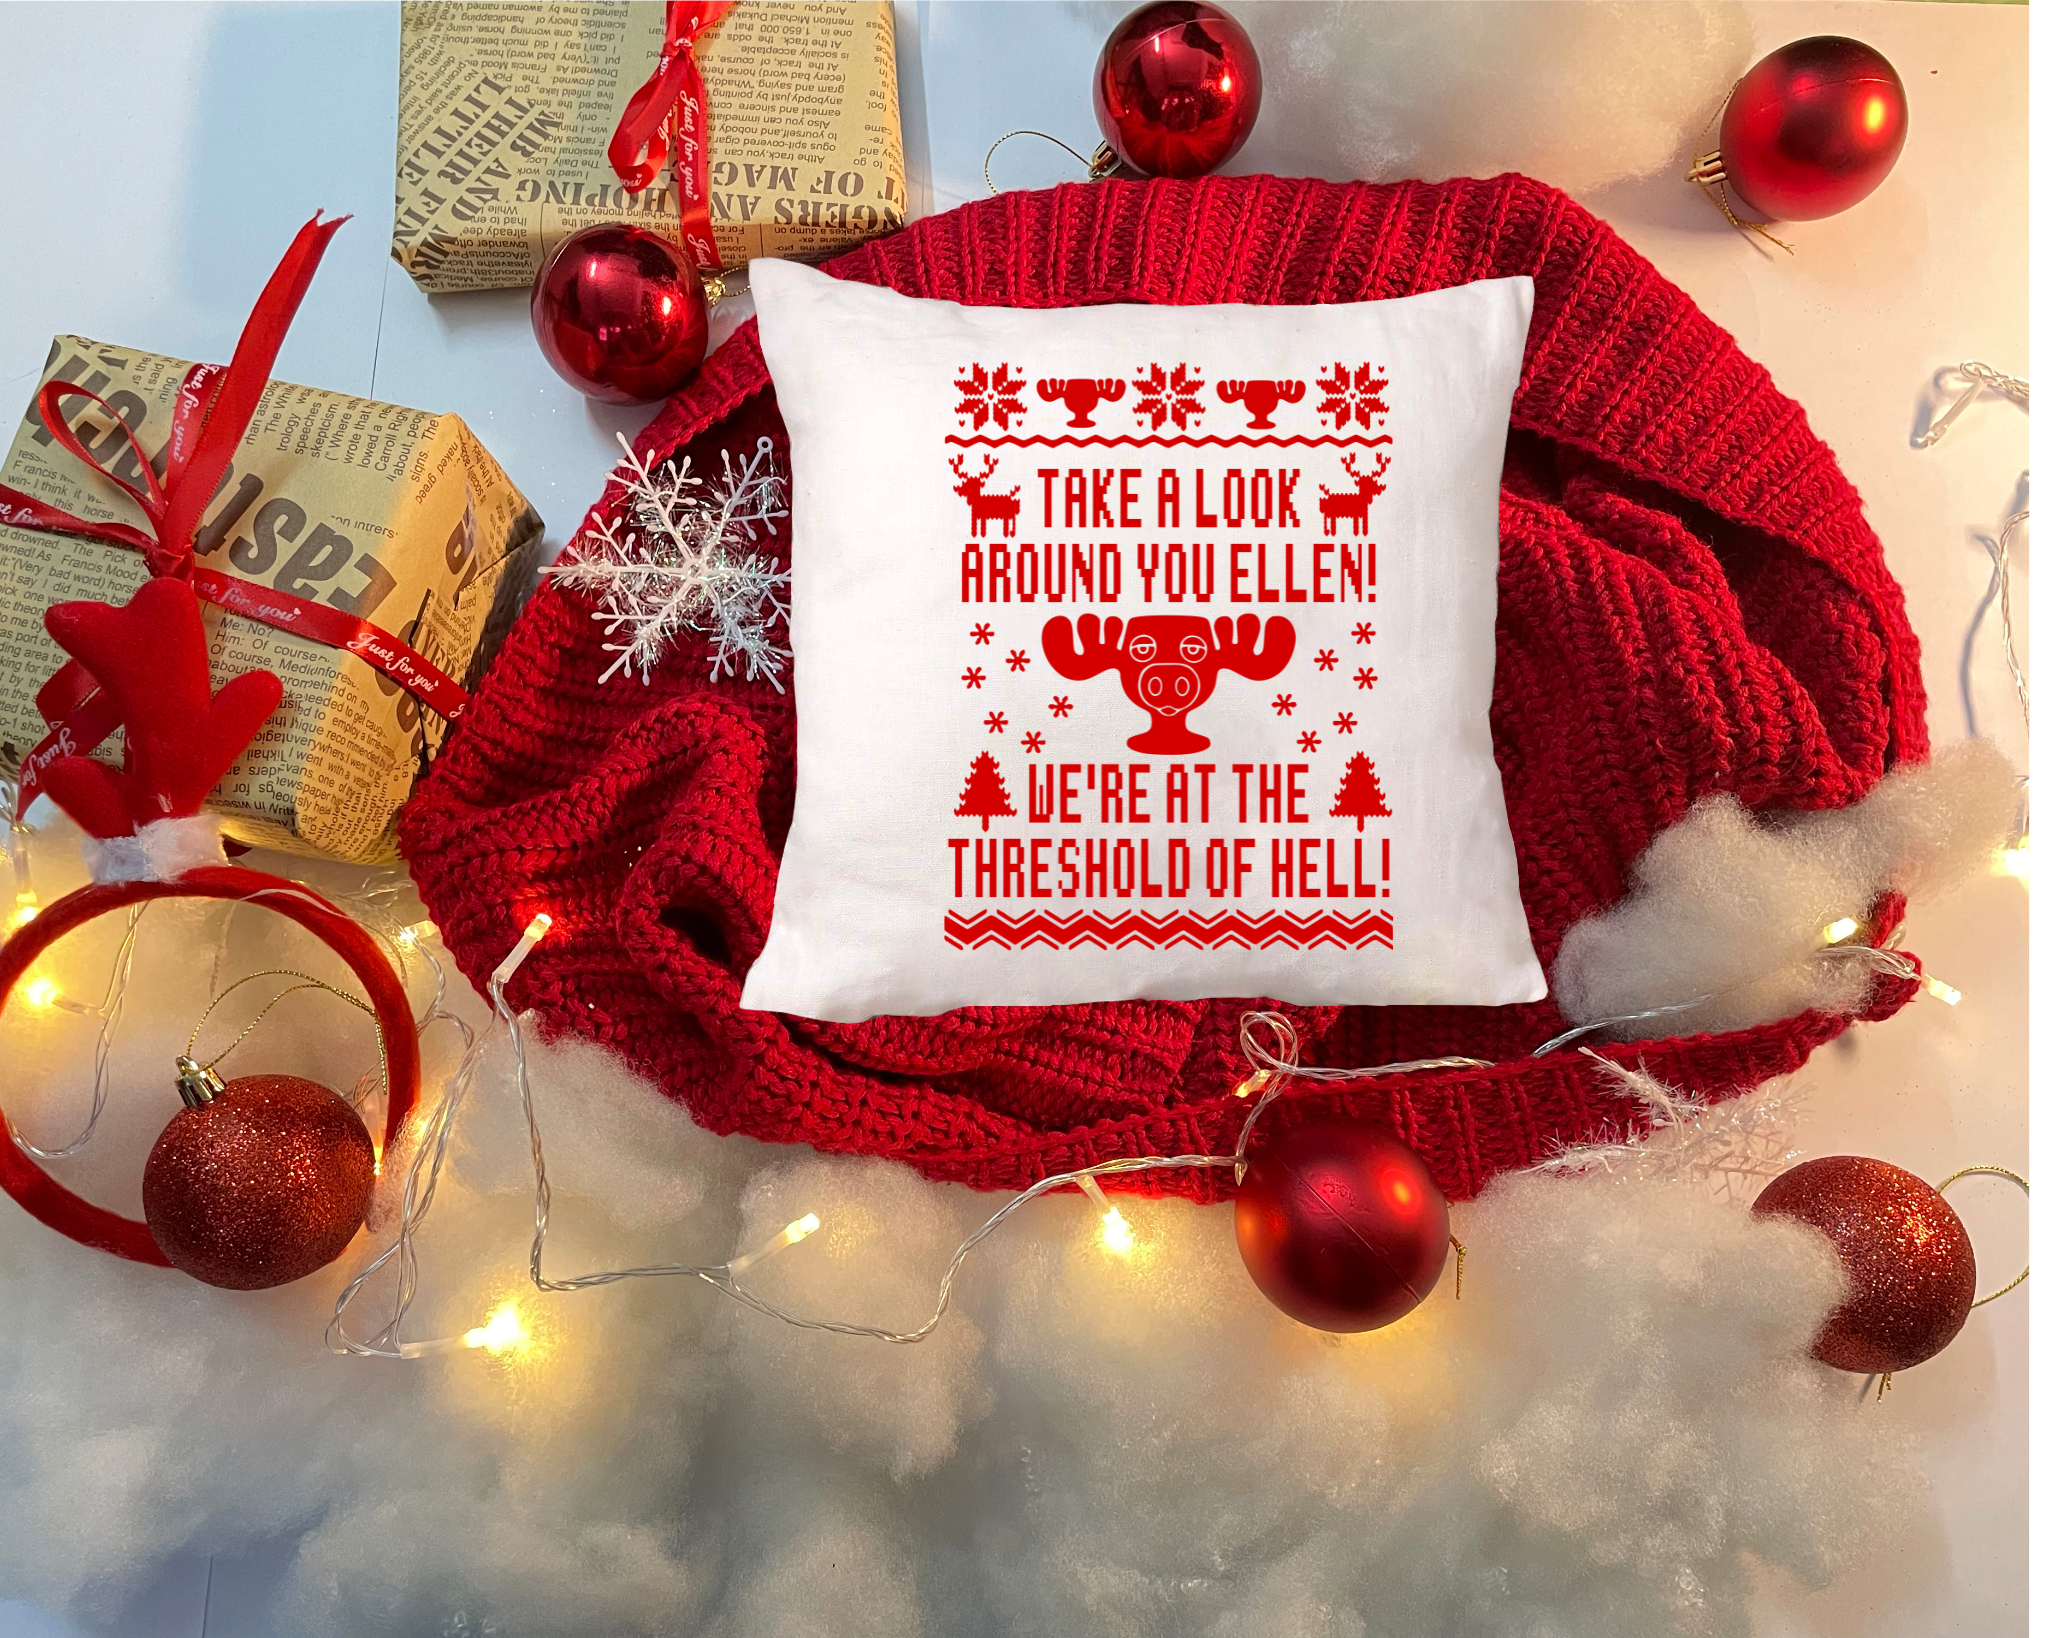 Take A Look Around You Ellen! We're At The Threshold Of Hell Pillow Cover, Christmas Vacation